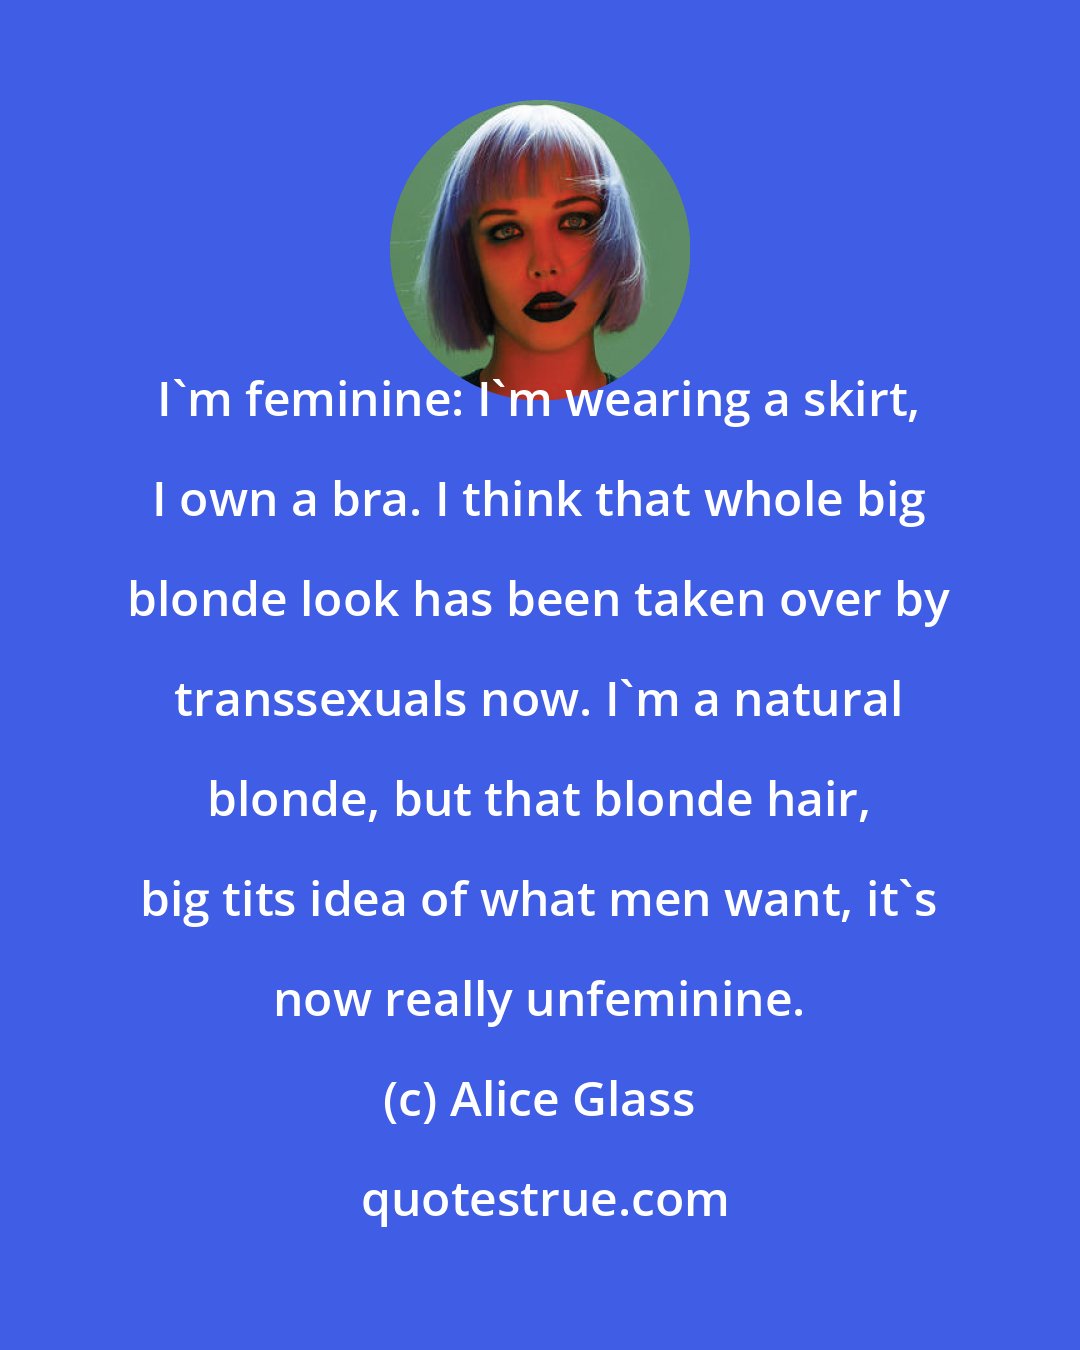 Alice Glass: I'm feminine: I'm wearing a skirt, I own a bra. I think that whole big blonde look has been taken over by transsexuals now. I'm a natural blonde, but that blonde hair, big tits idea of what men want, it's now really unfeminine.